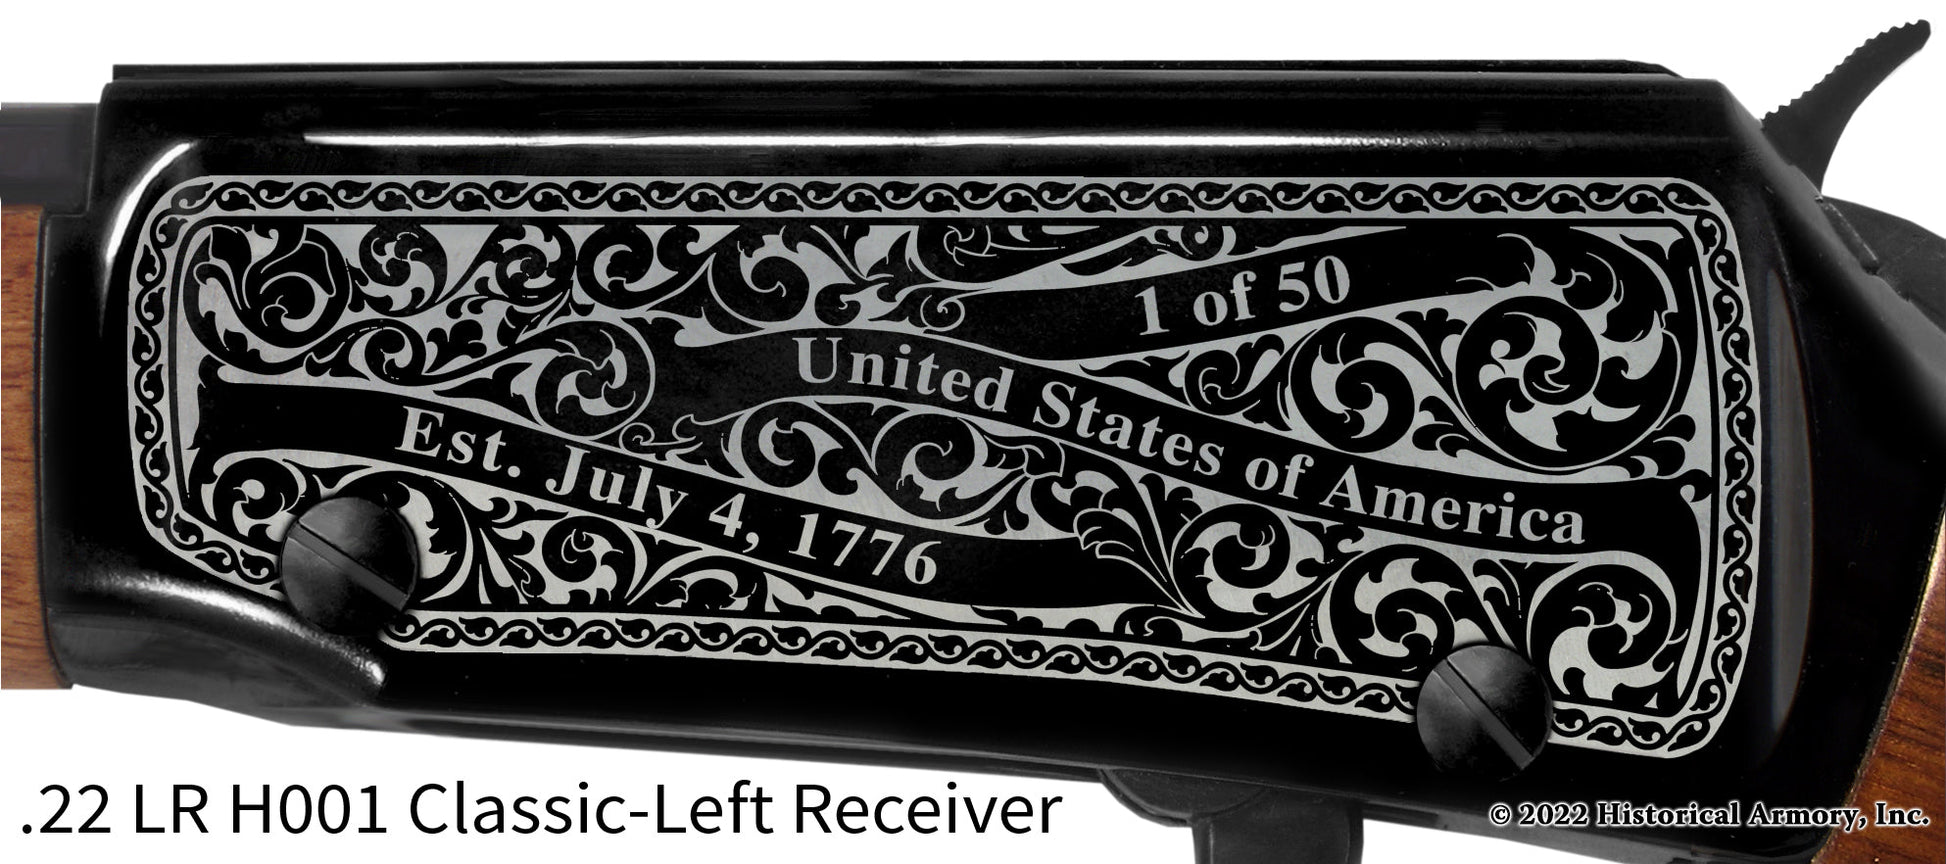 Marshall County West Virginia Engraved Henry H001 Rifle